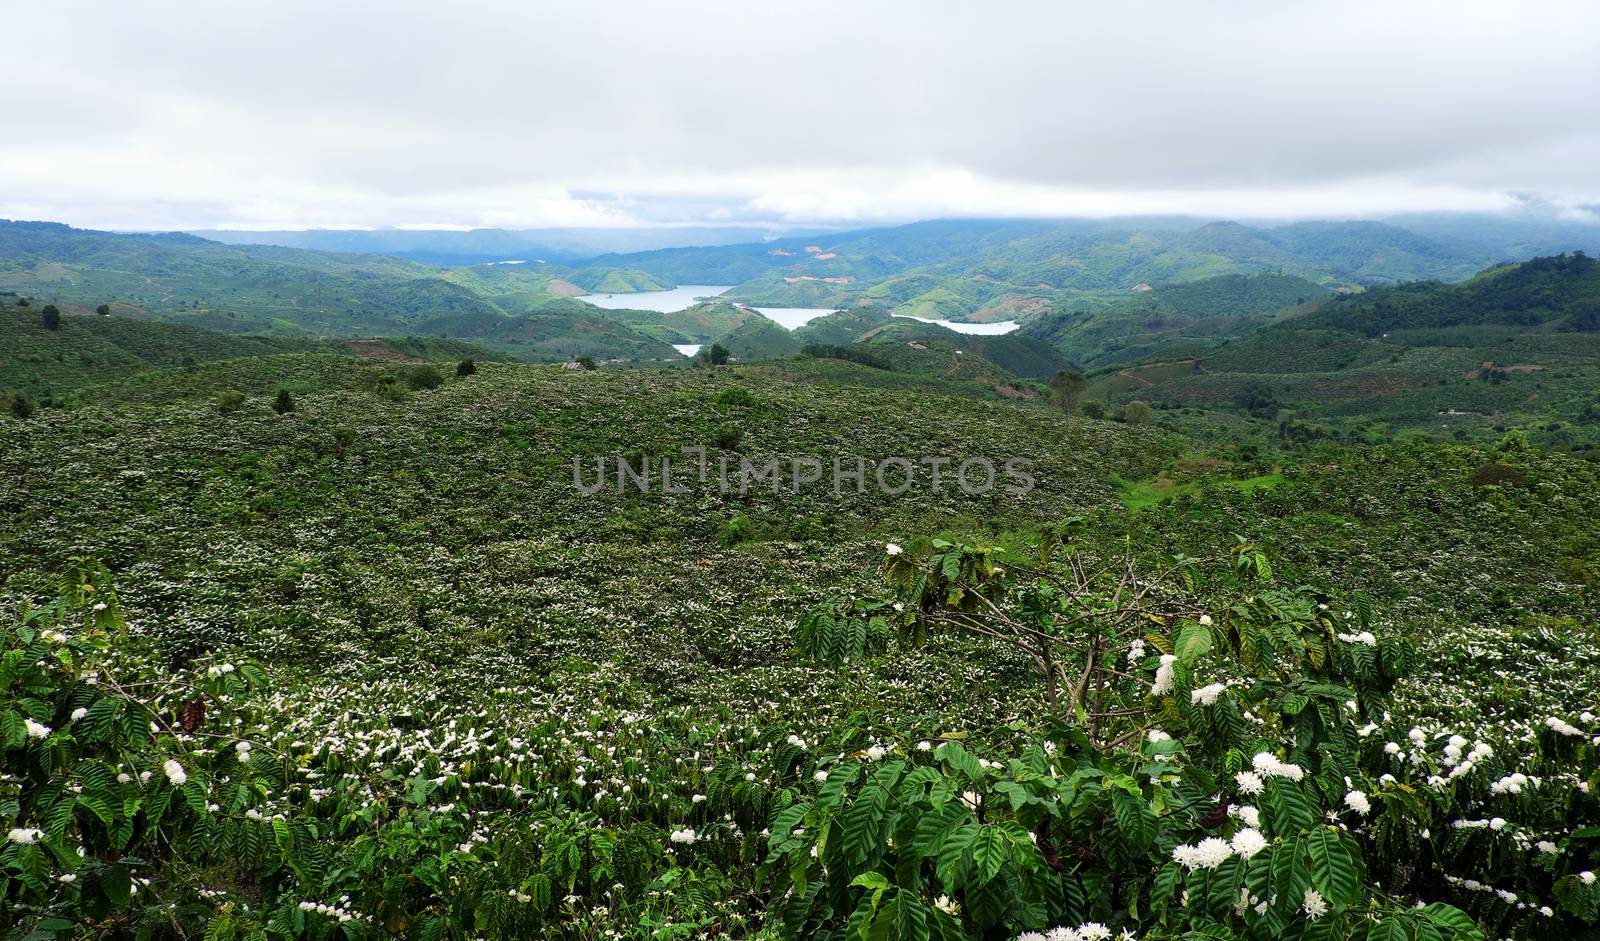 wide coffee plantation in blossoms season by xuanhuongho